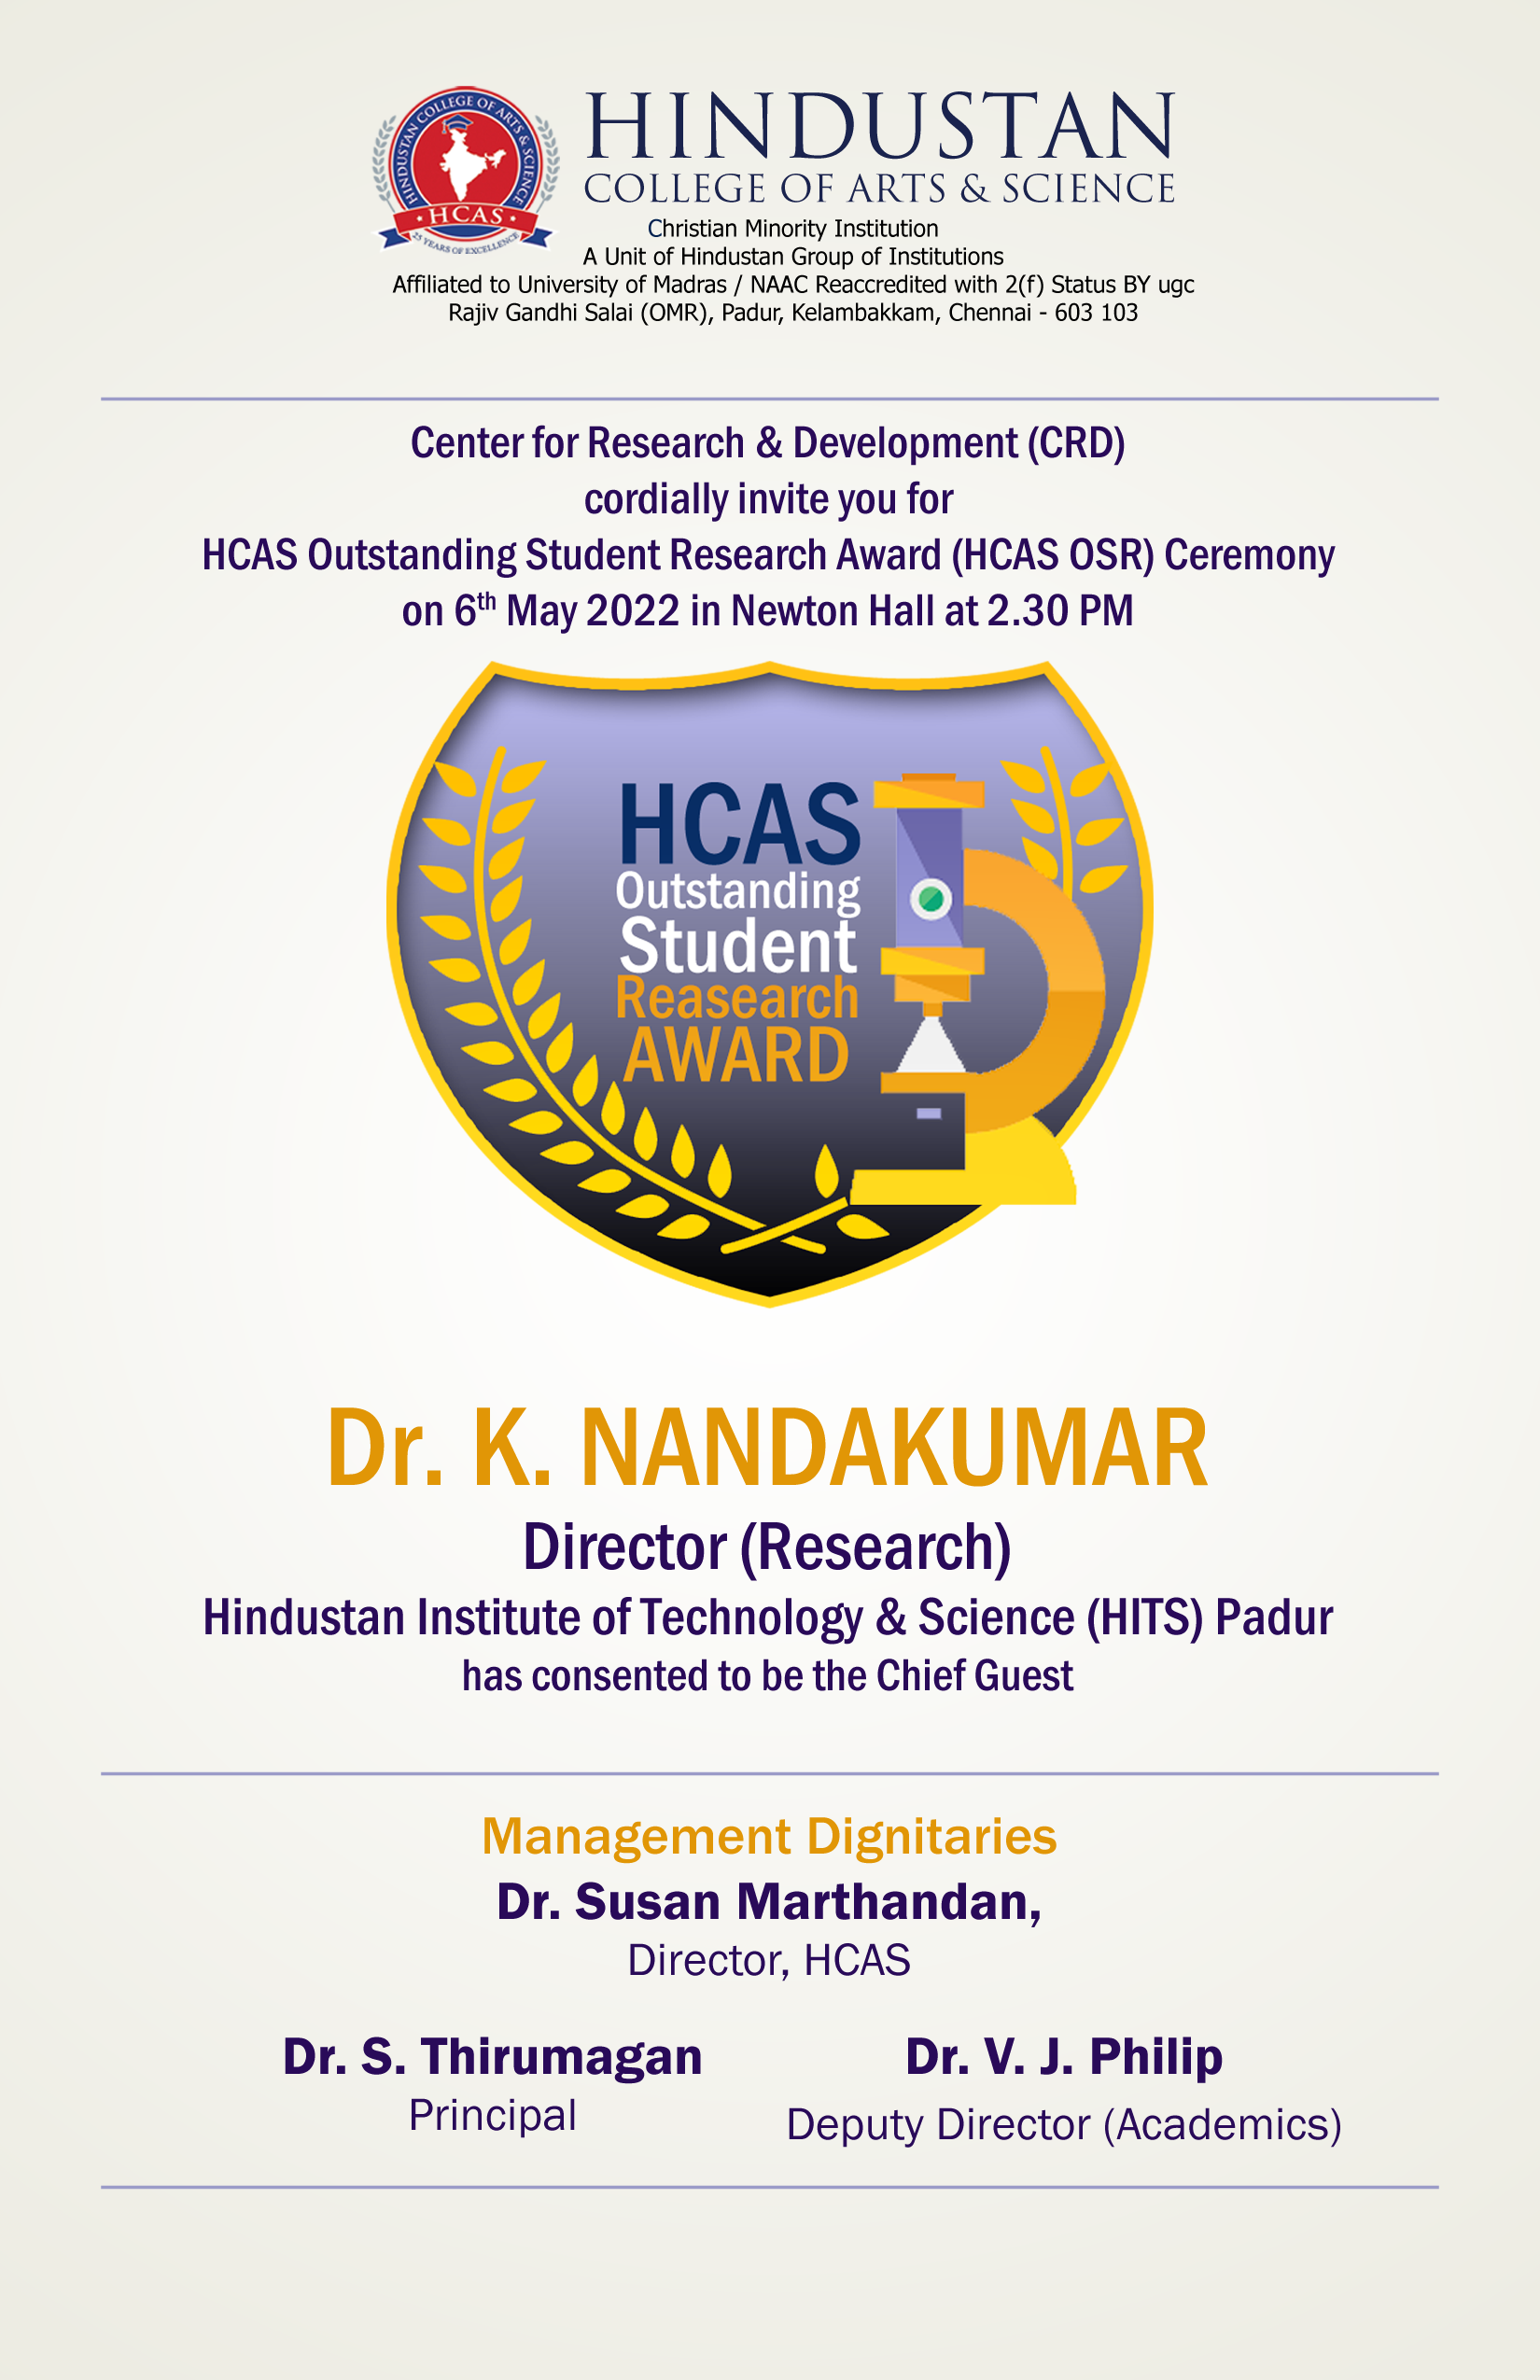 HCAS Outstanding Student Research Award (HCAS OSR) Ceremony